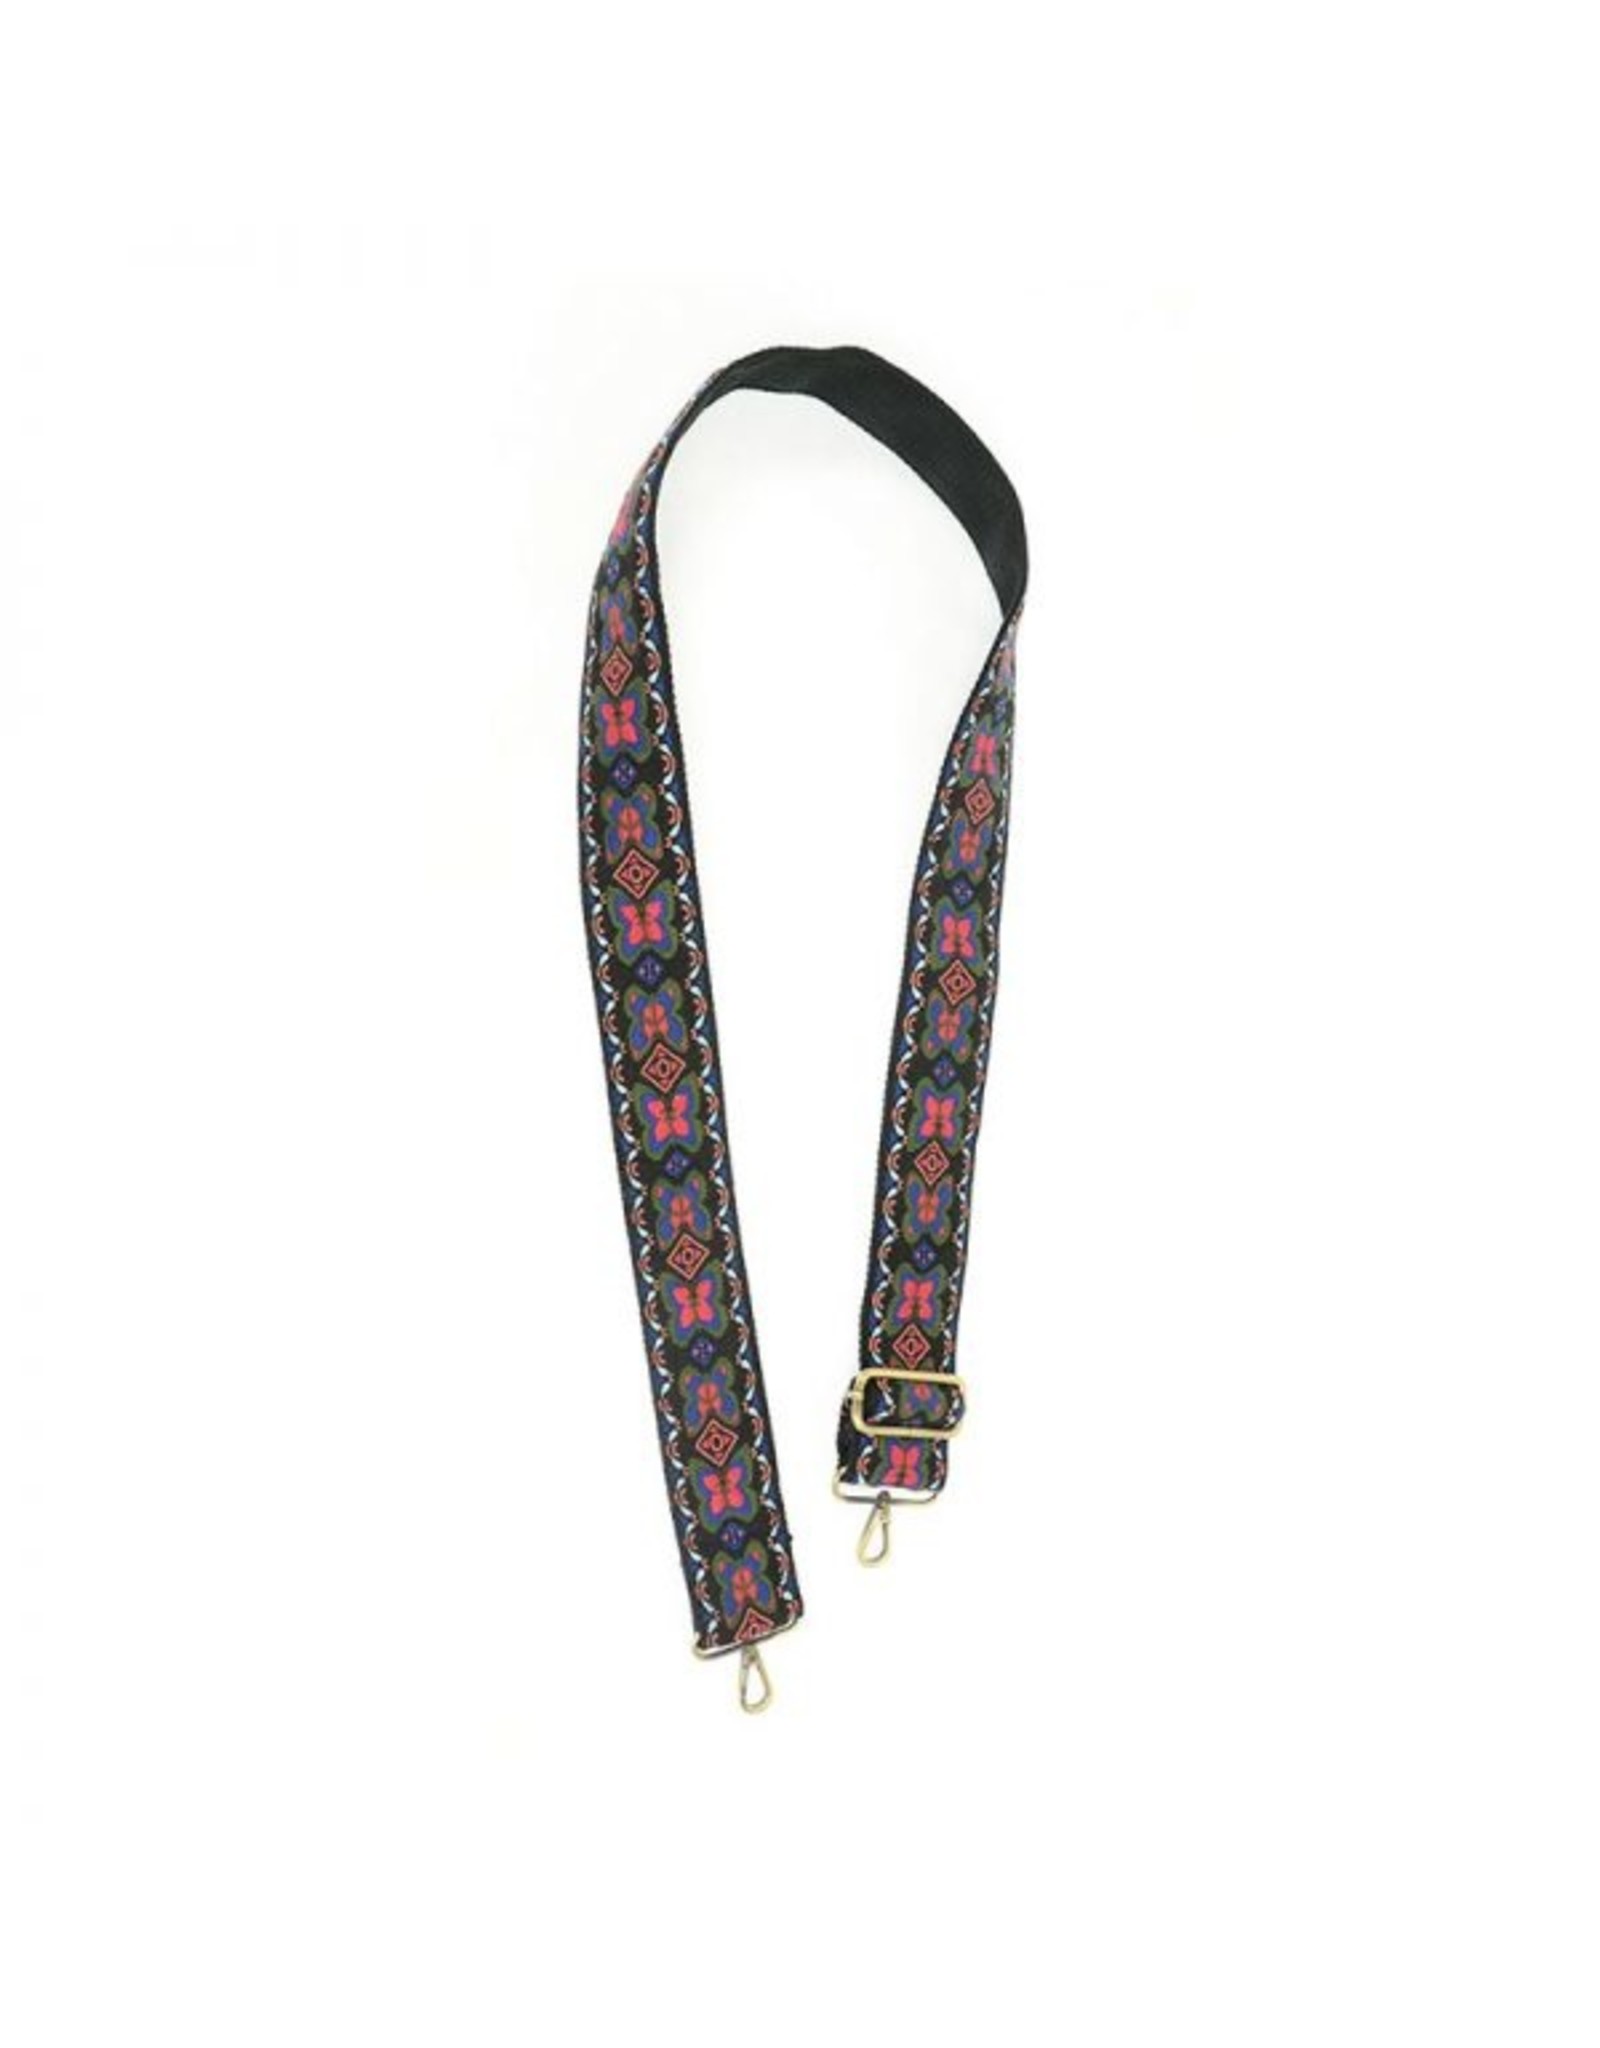 2" Black/Pink Butterfly Embroidered Guitar Strap